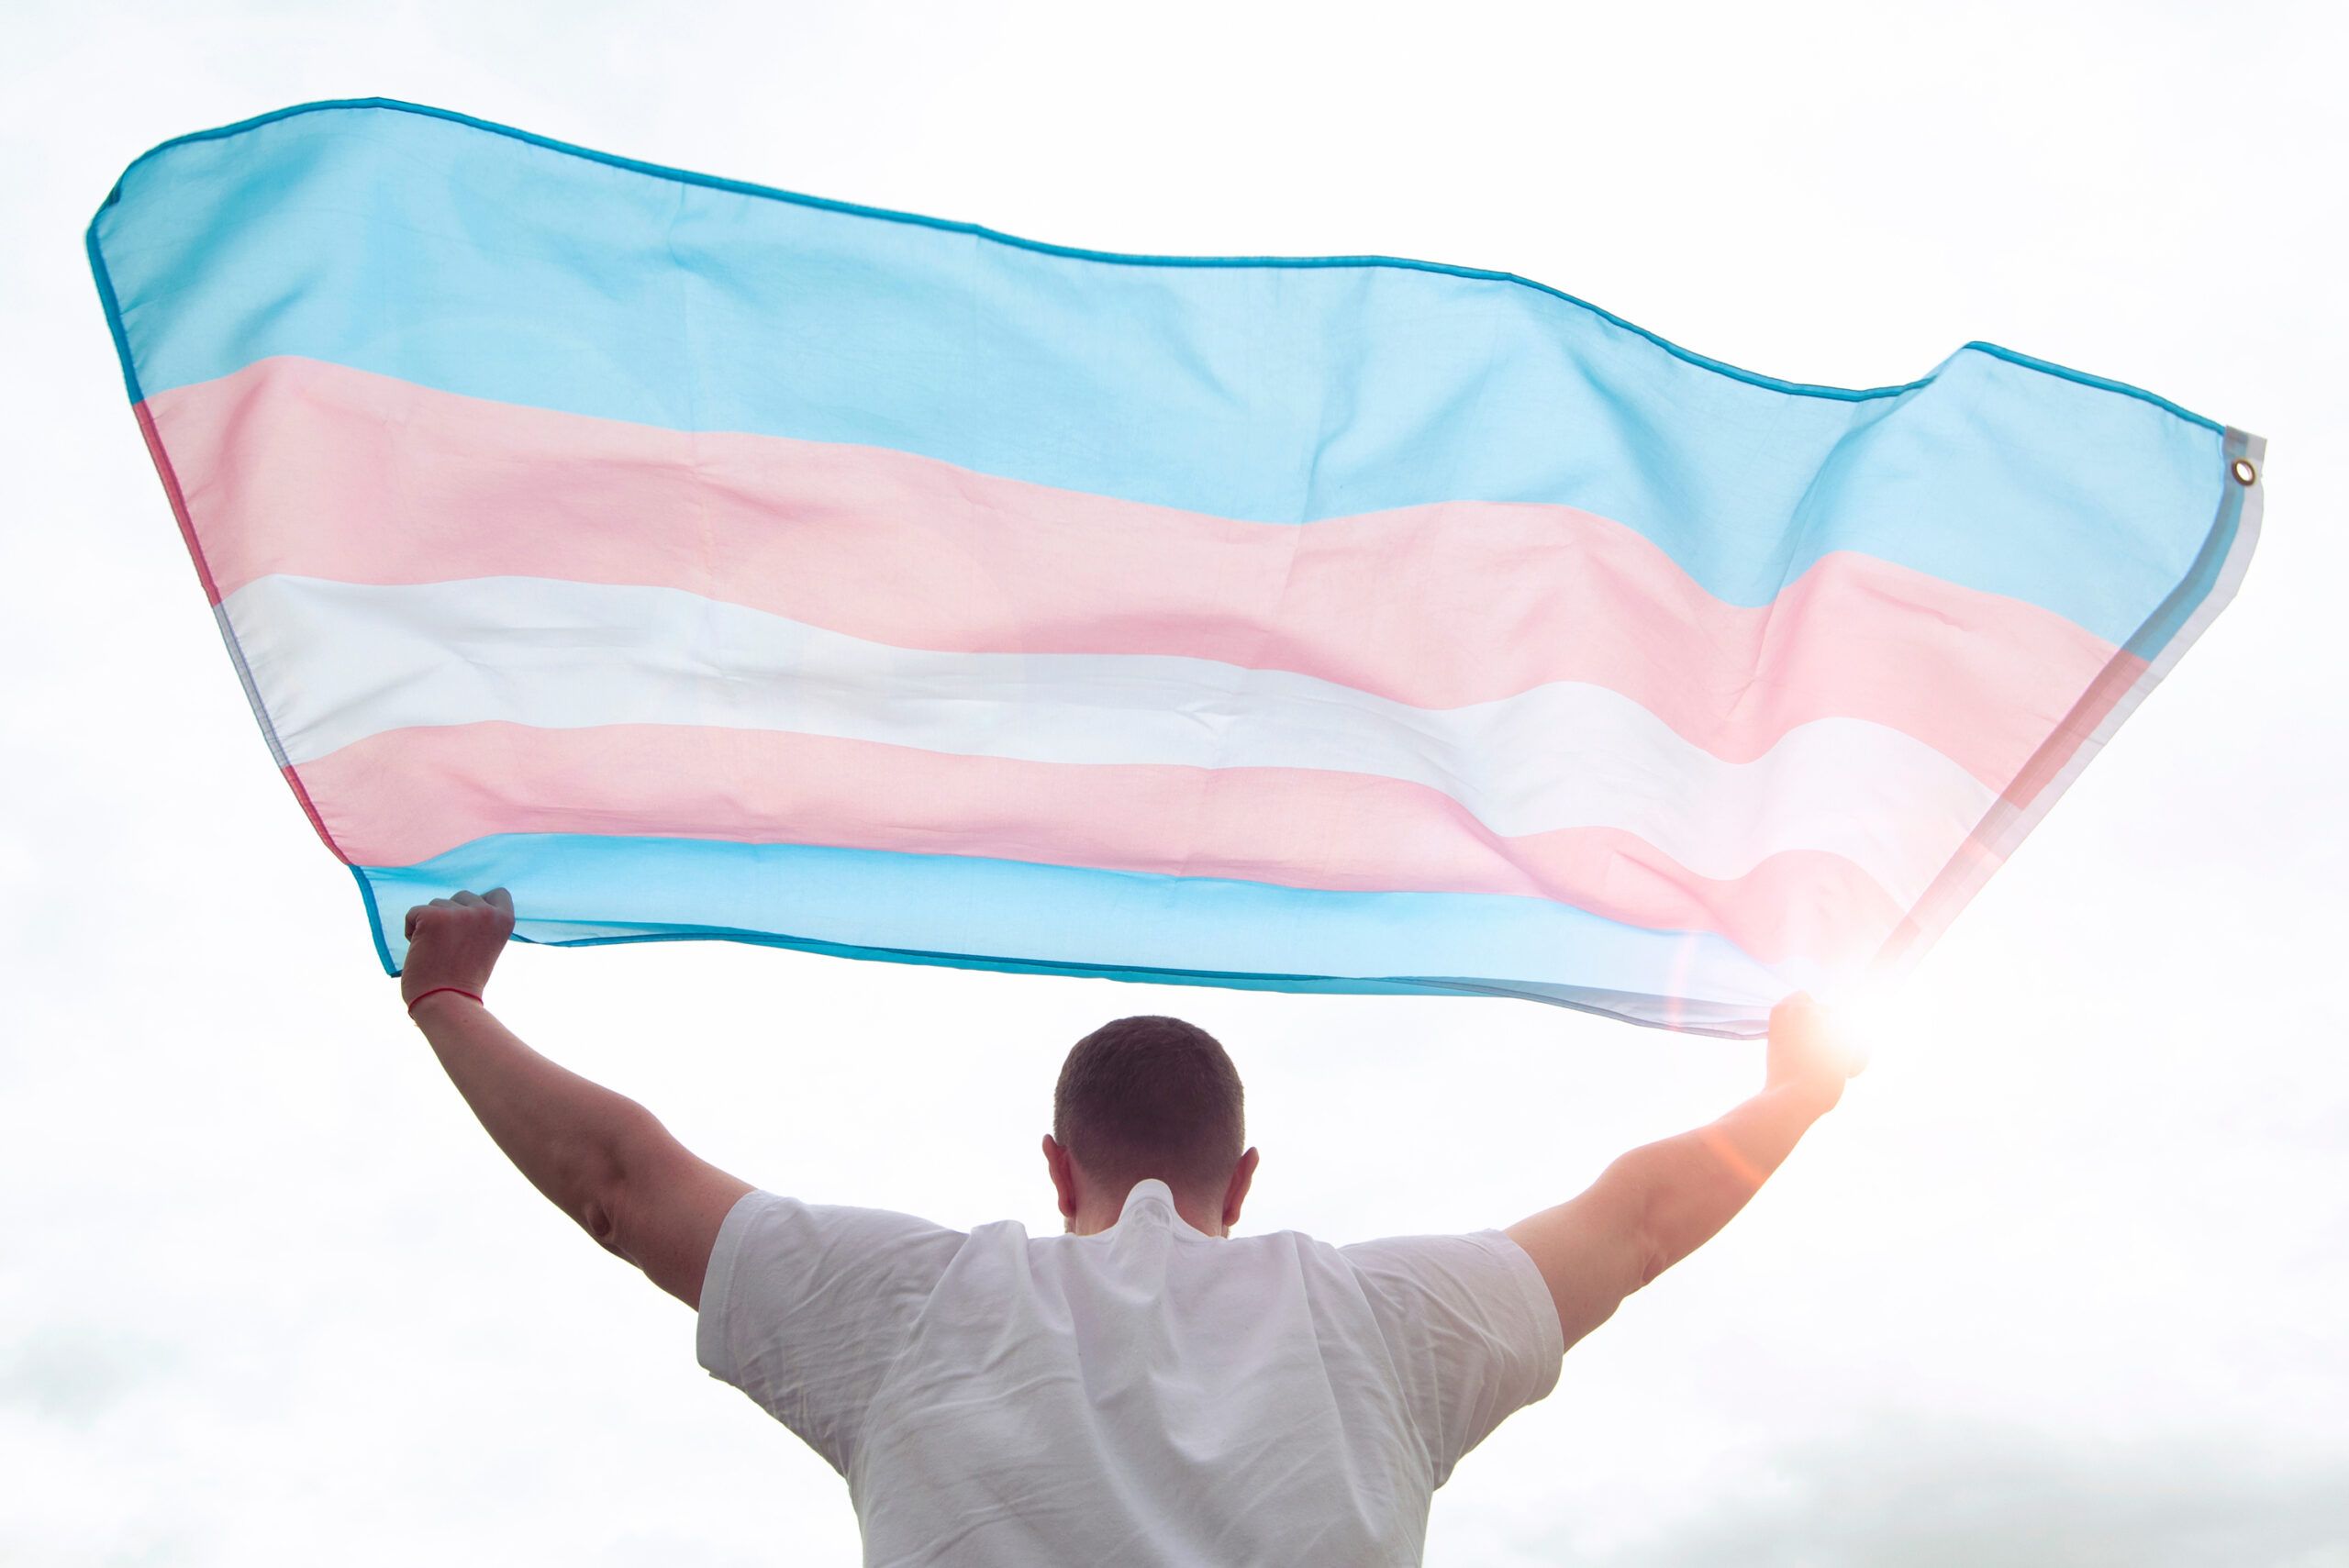 Parenting Trans Teens: How To Provide The Love And Support They Need